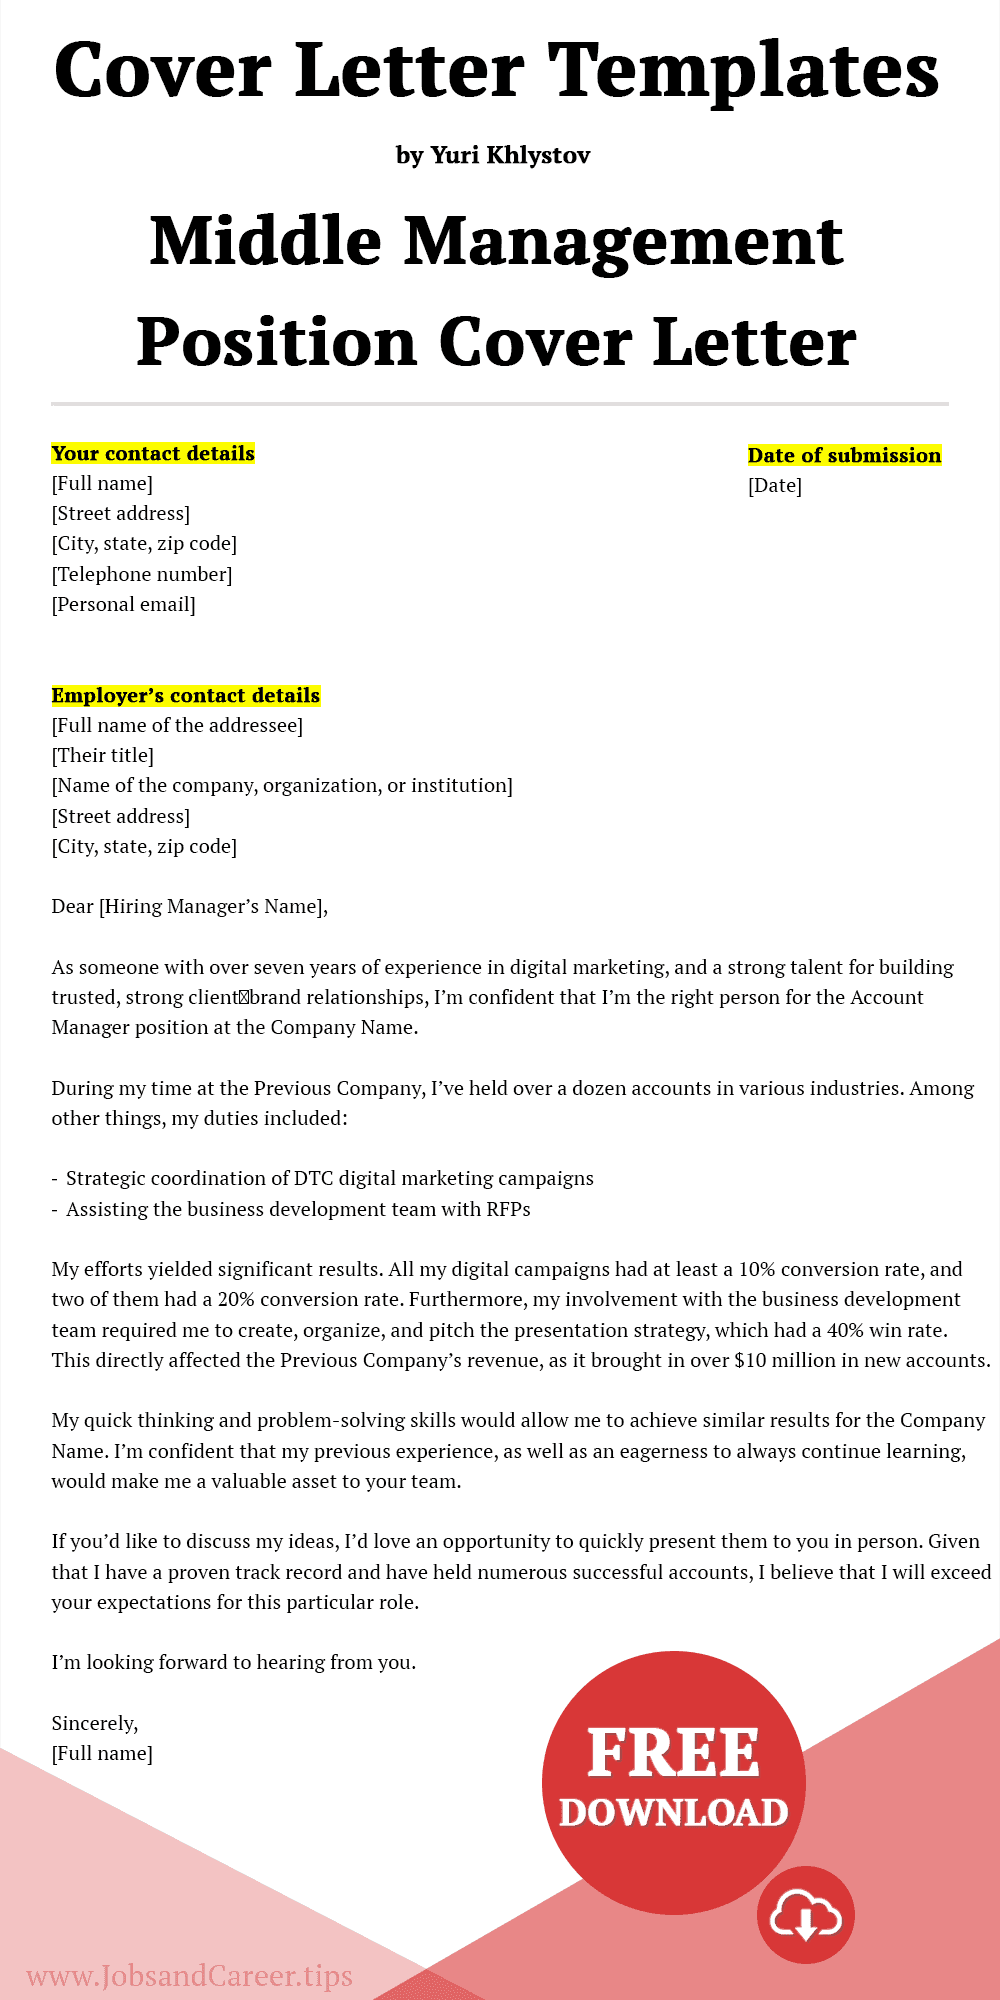 cover letter for middle management position